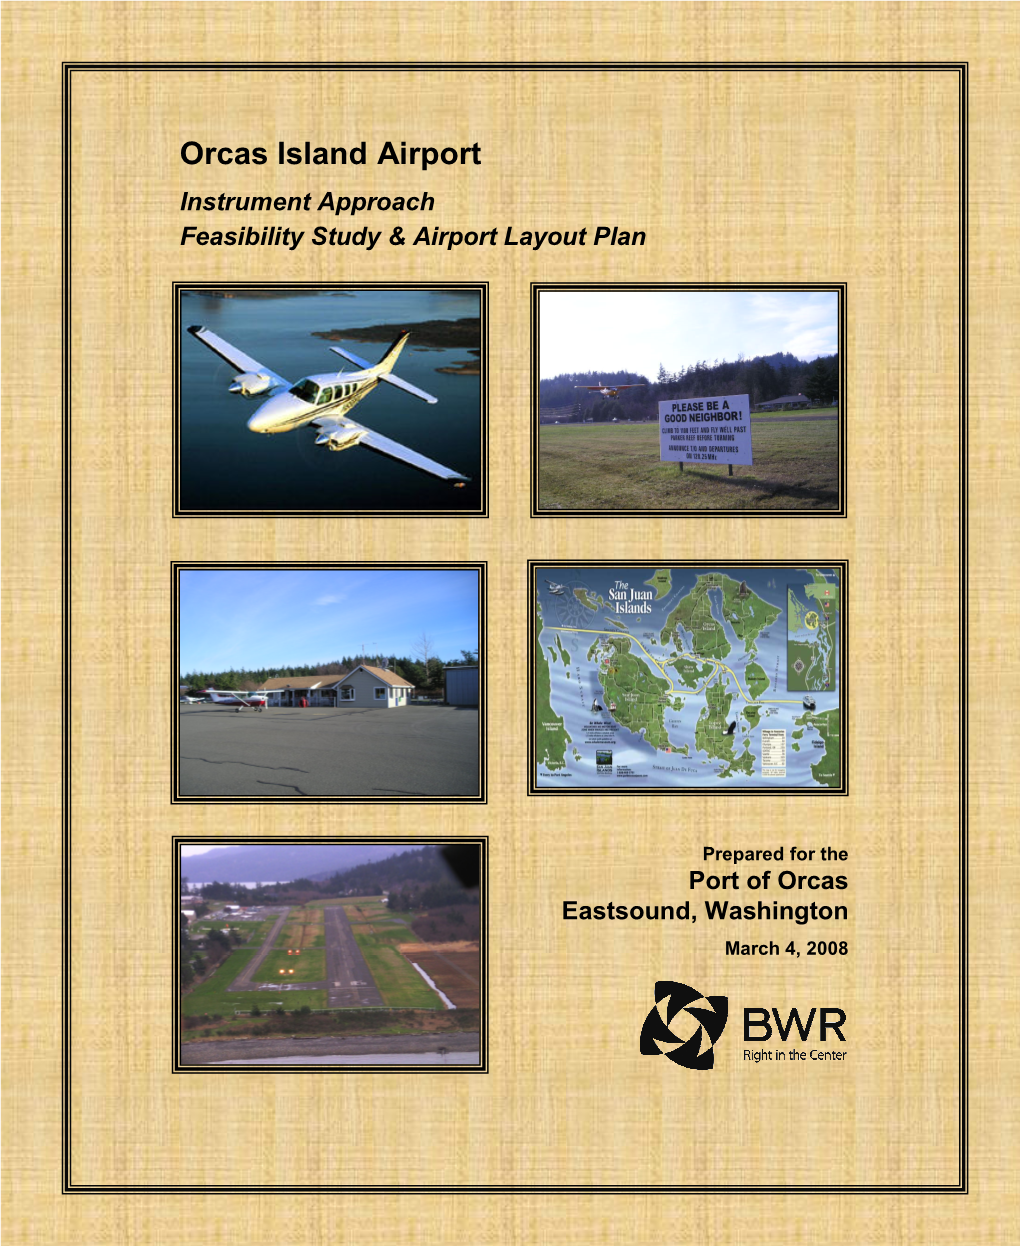 Orcas Island Airport Instrument Approach Feasibility Study & Airport Layout Plan